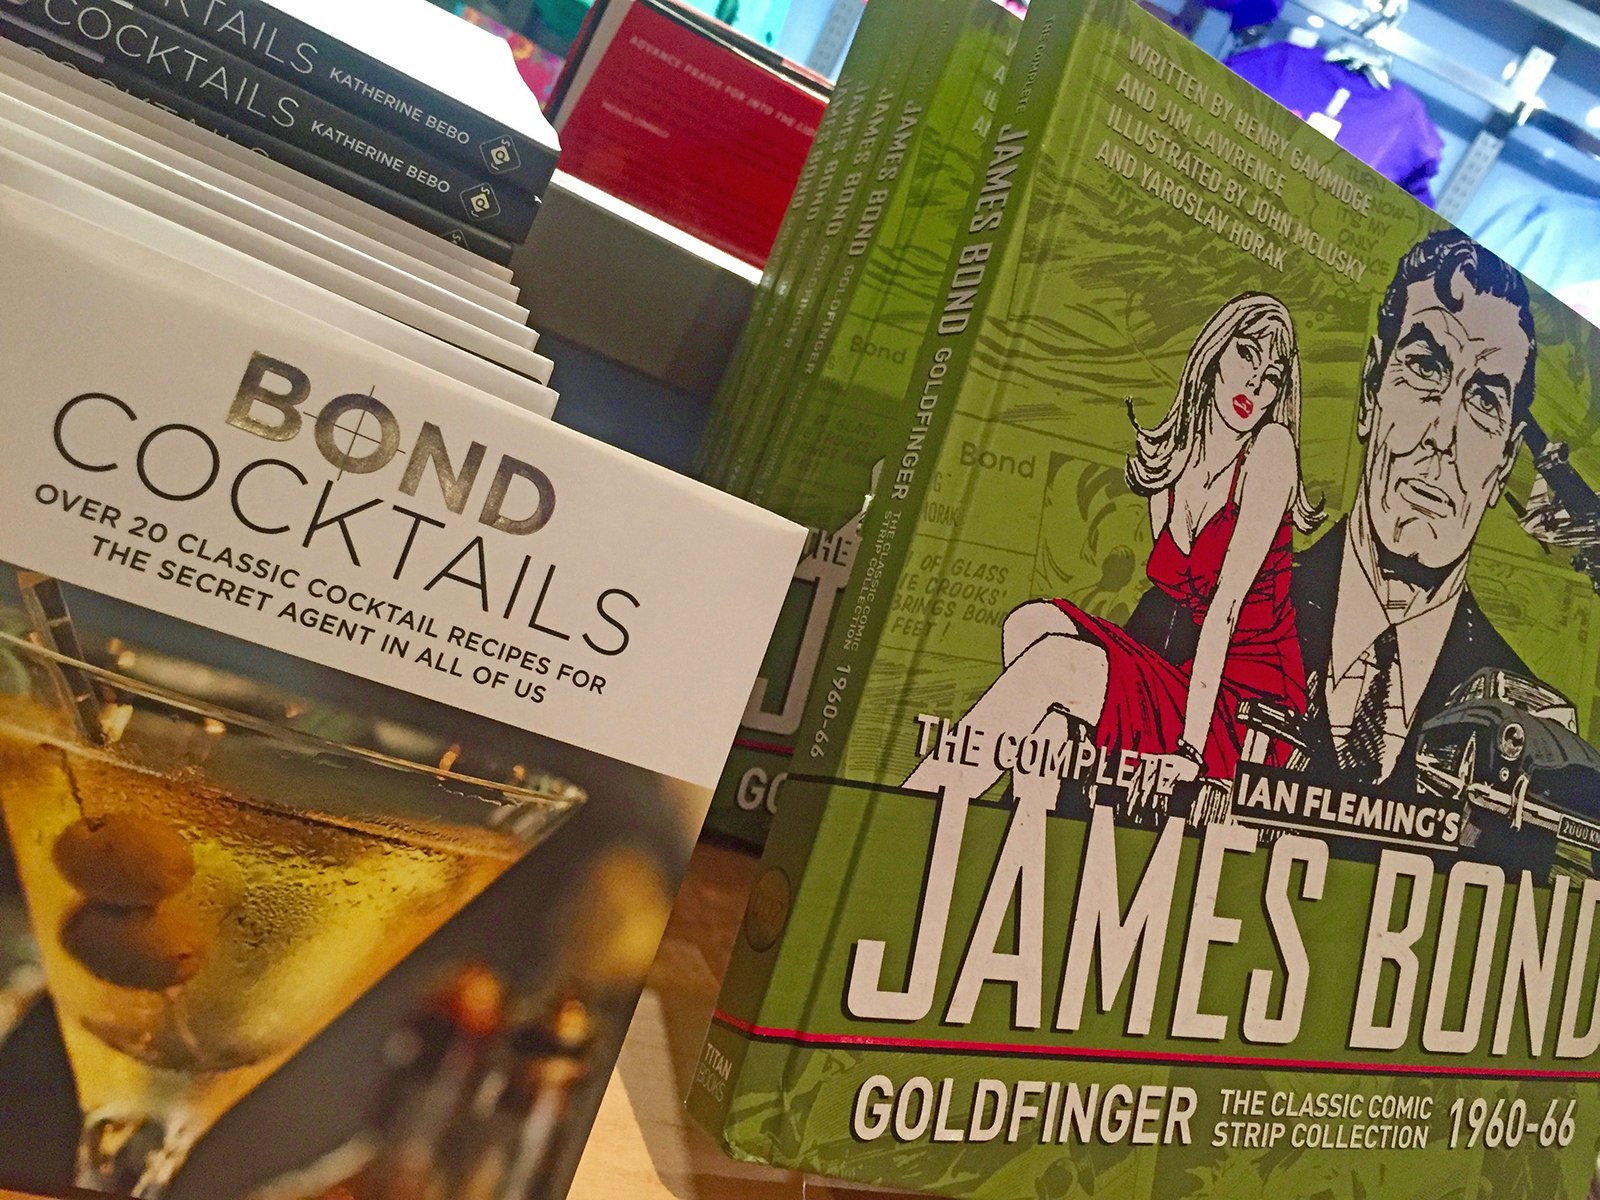 close up of two books on James Bond at the International Spy Museum